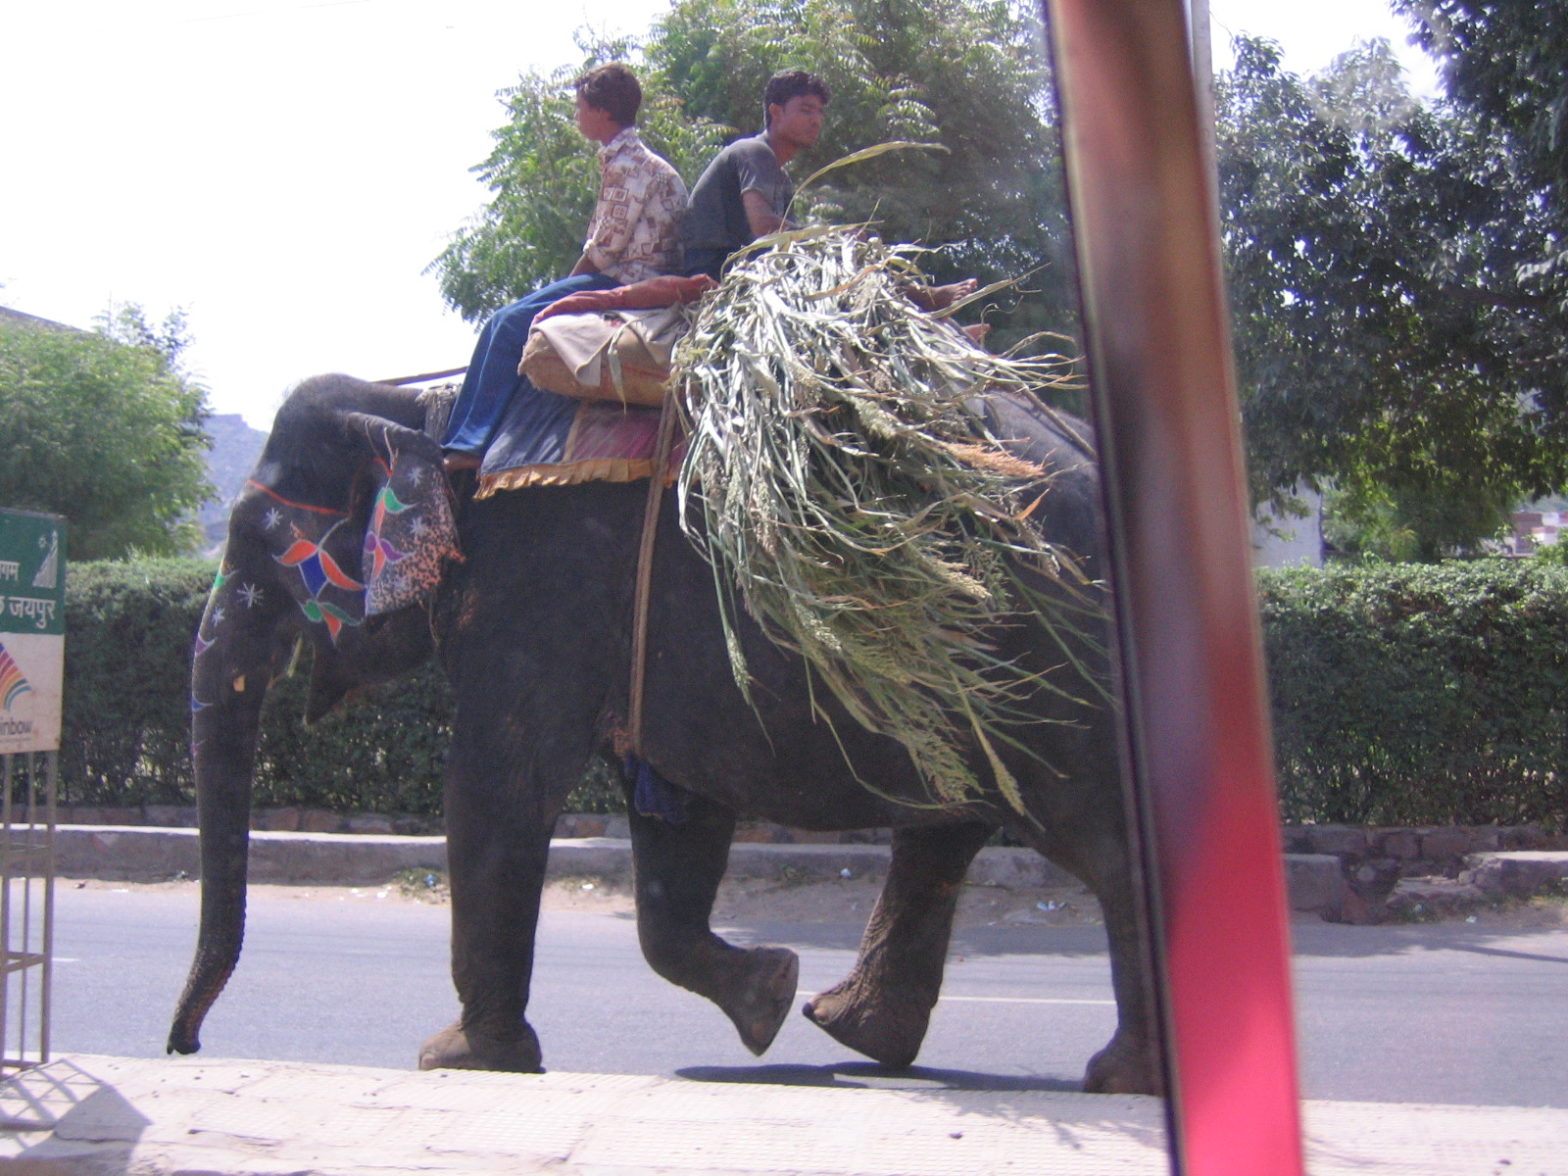 An elephant walking on the street in Jaipur, carrying a load of fodder